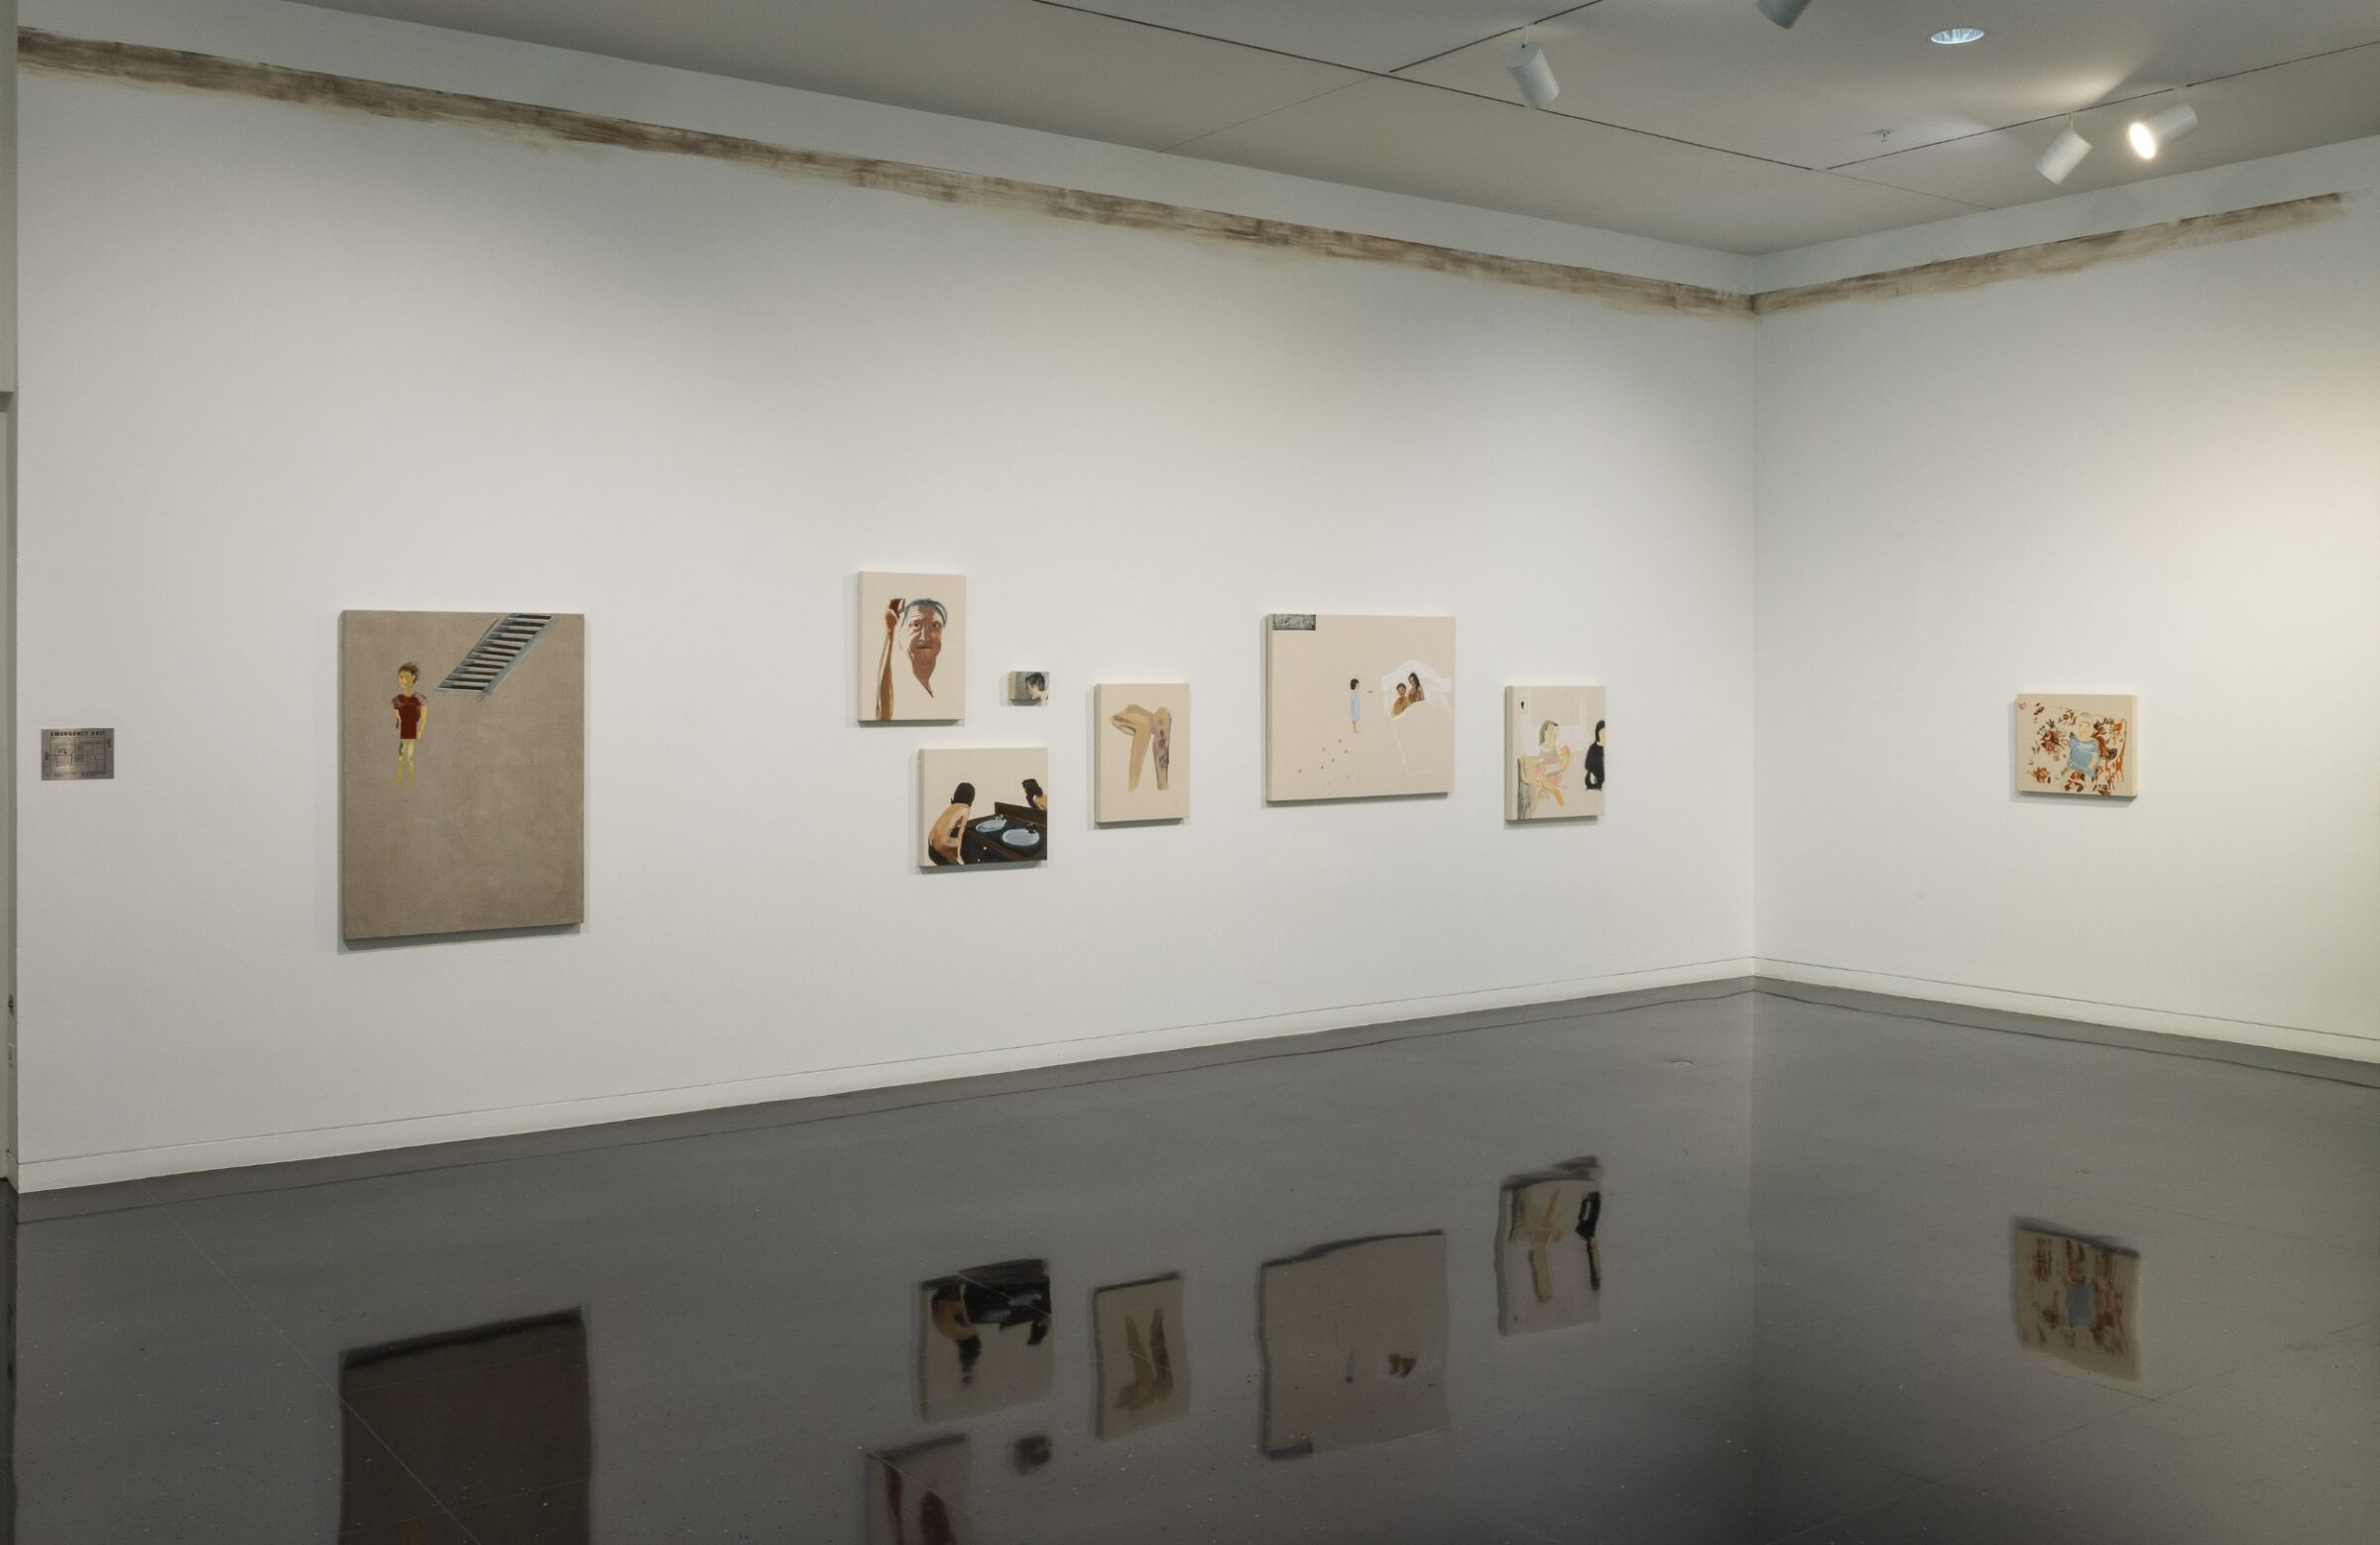 A white gallery wall with six paintings of varying sizes. At the top of the wall, there is a faded brown streak painted to resemble a flood line.